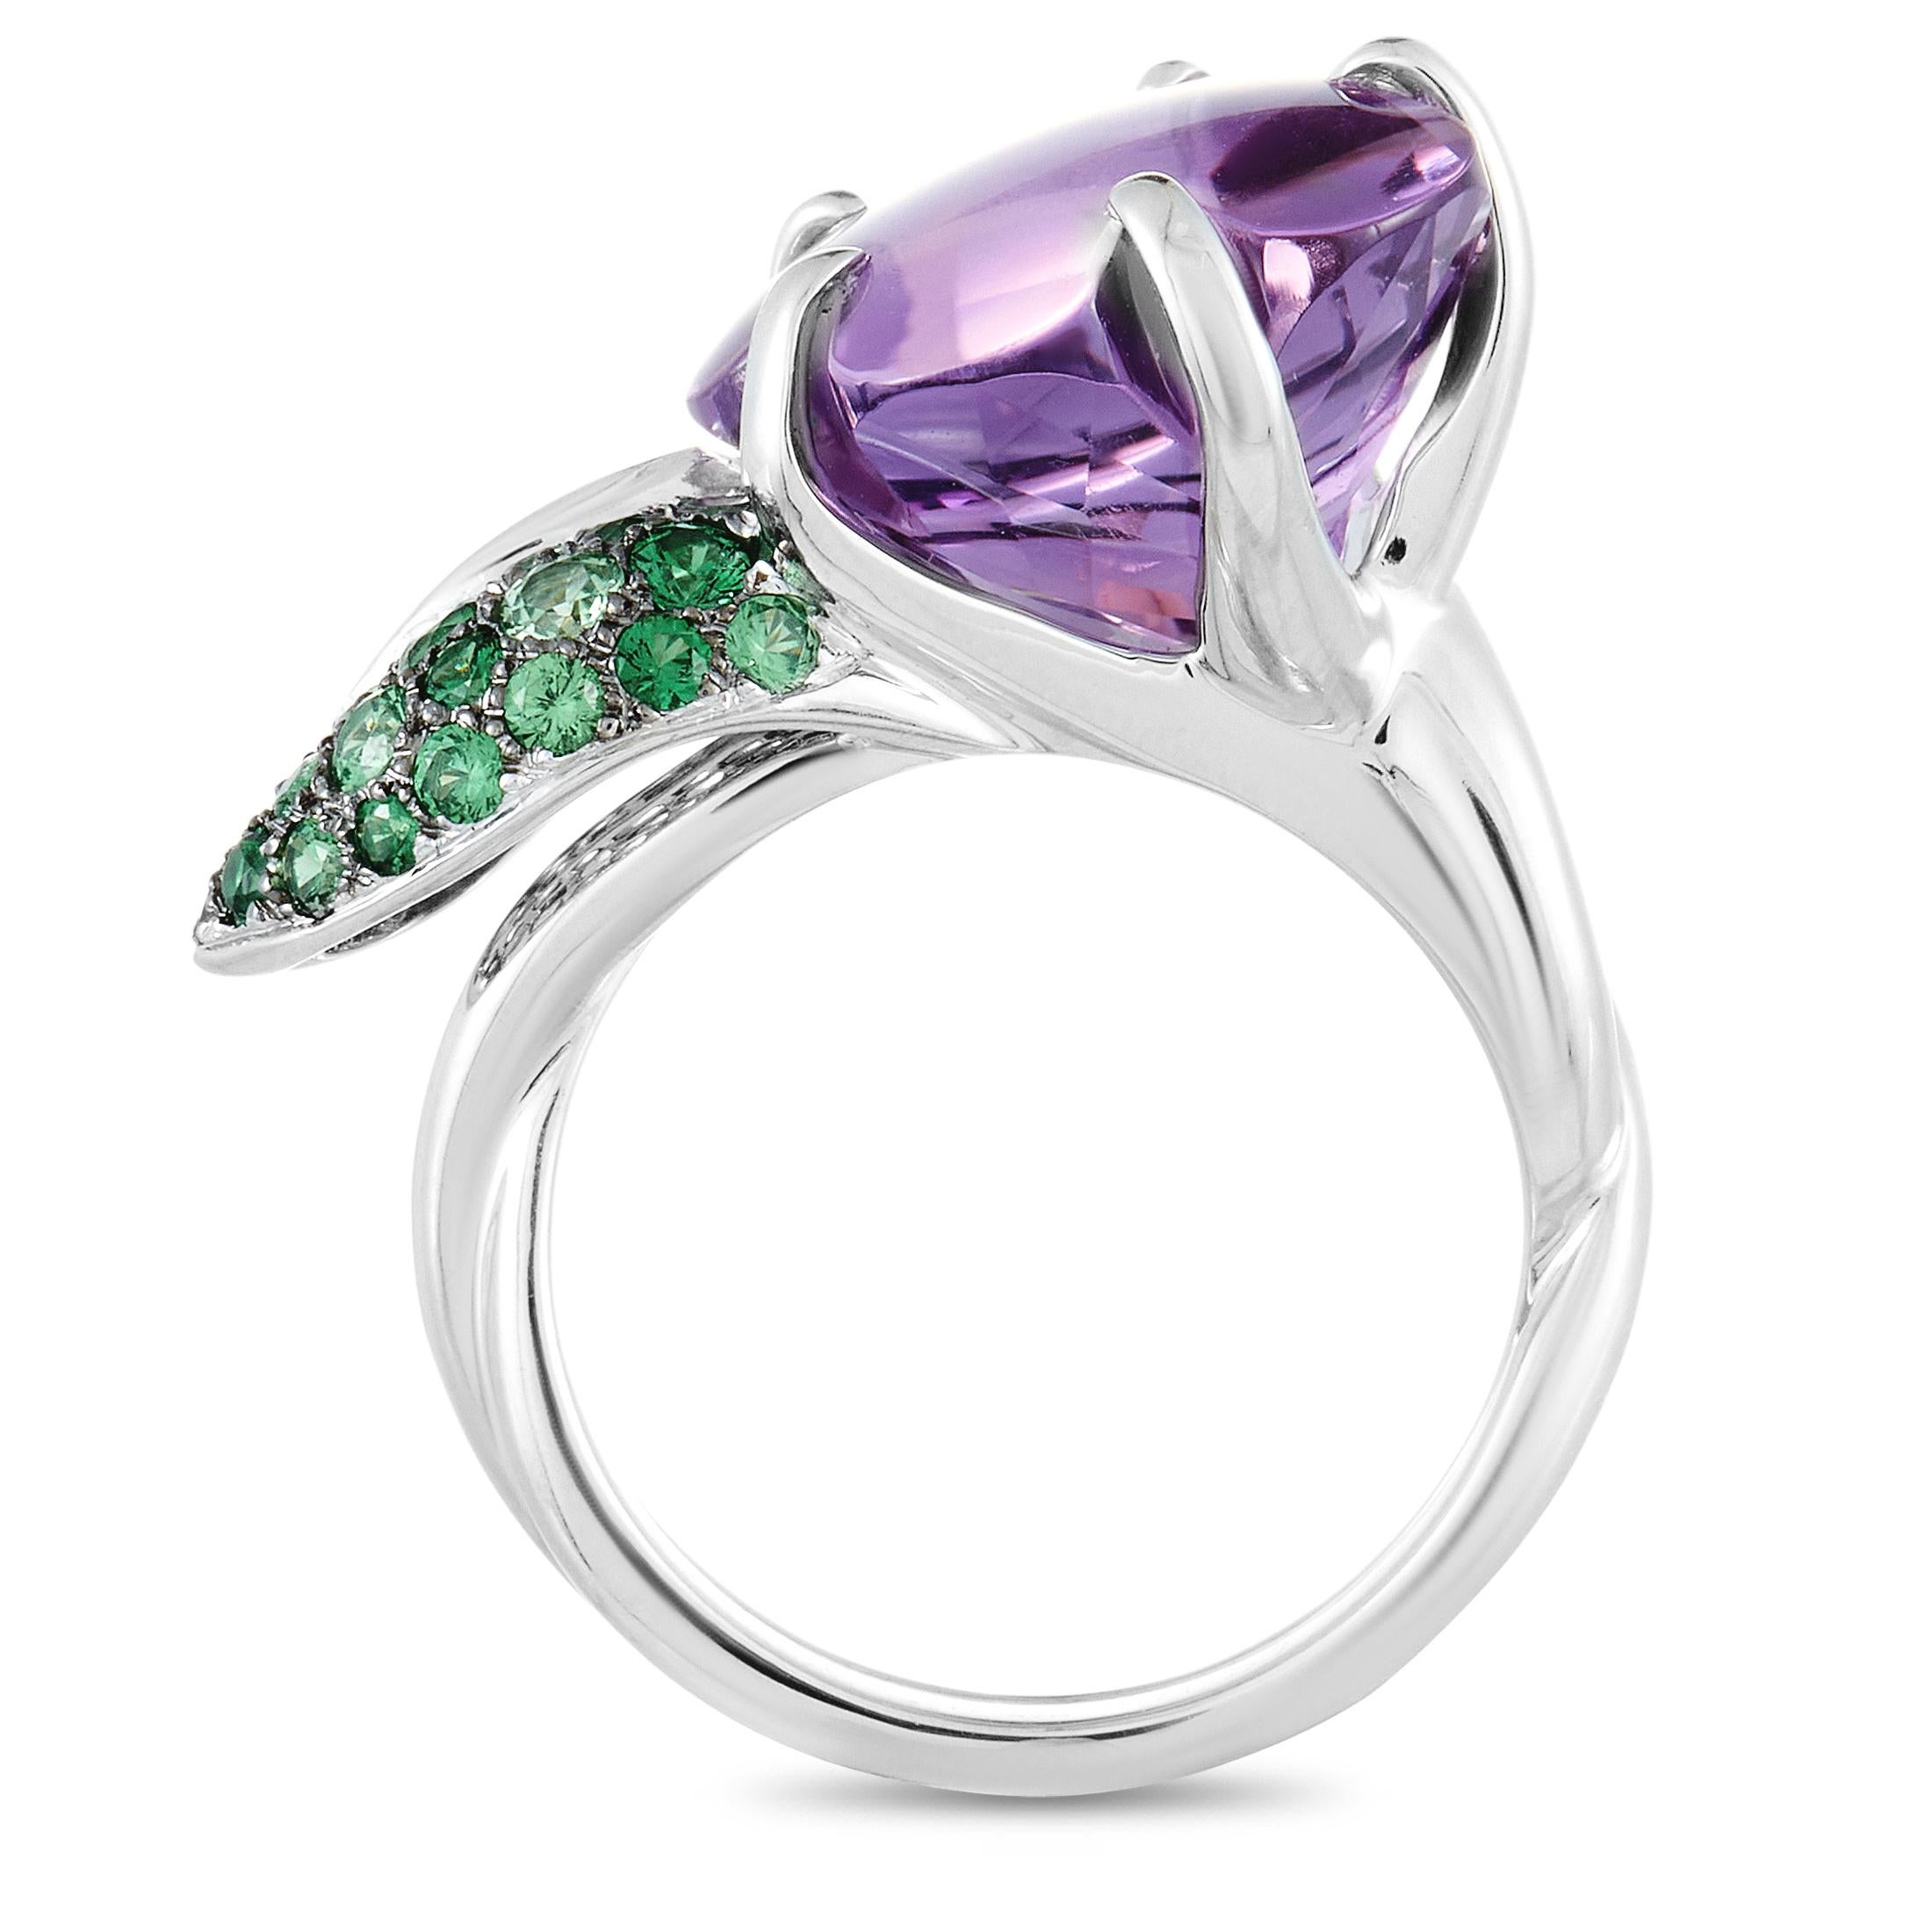 This Chanel flower ring is made of 18K white gold and embellished with tsavorites and an amethyst. The ring weighs 14.2 grams. It boasts band thickness of 5 mm and top height of 10 mm, while top dimensions measure 21 by 15 mm.
 
 The ring is